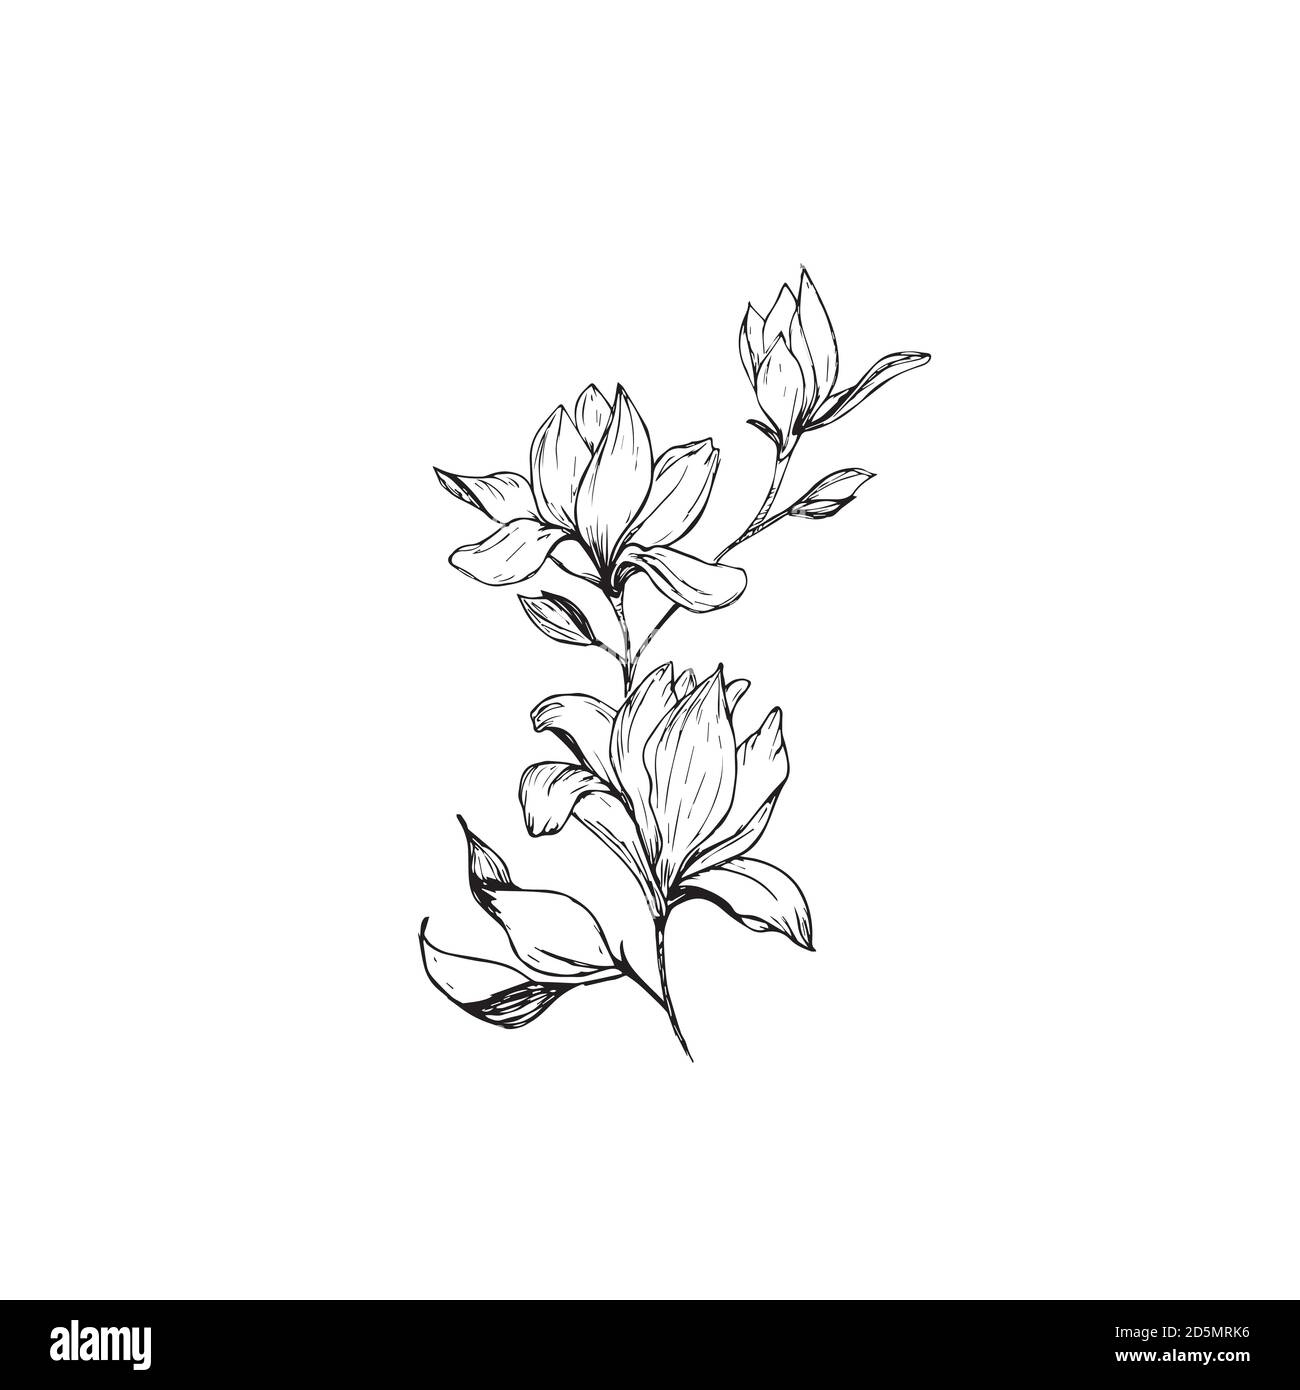 Magnolia flowers drawing and sketch with line-art on white backgrounds ...